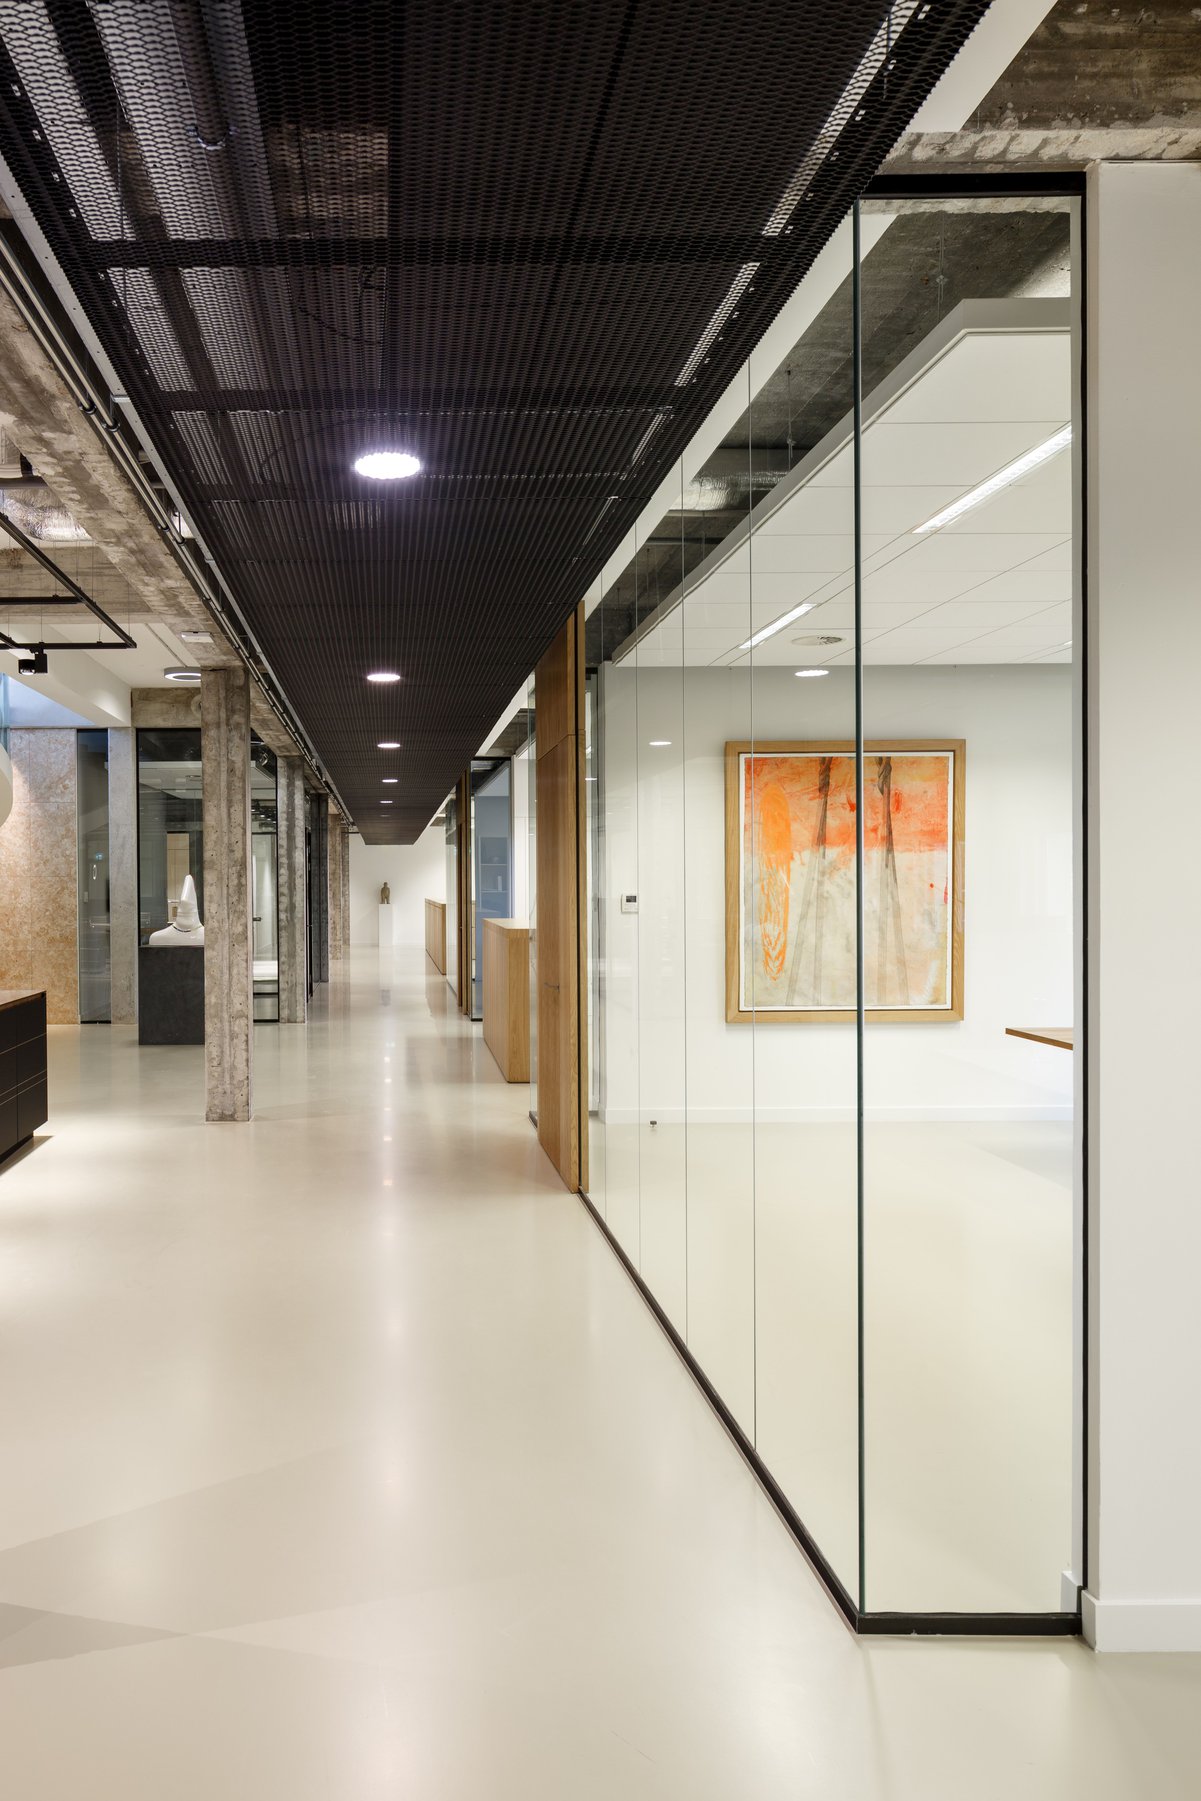 For EY Parthenon, Fokkema Architects realised a bright and surprising office environment, with a renovation of de nieuwe bank building in Rotterdam.